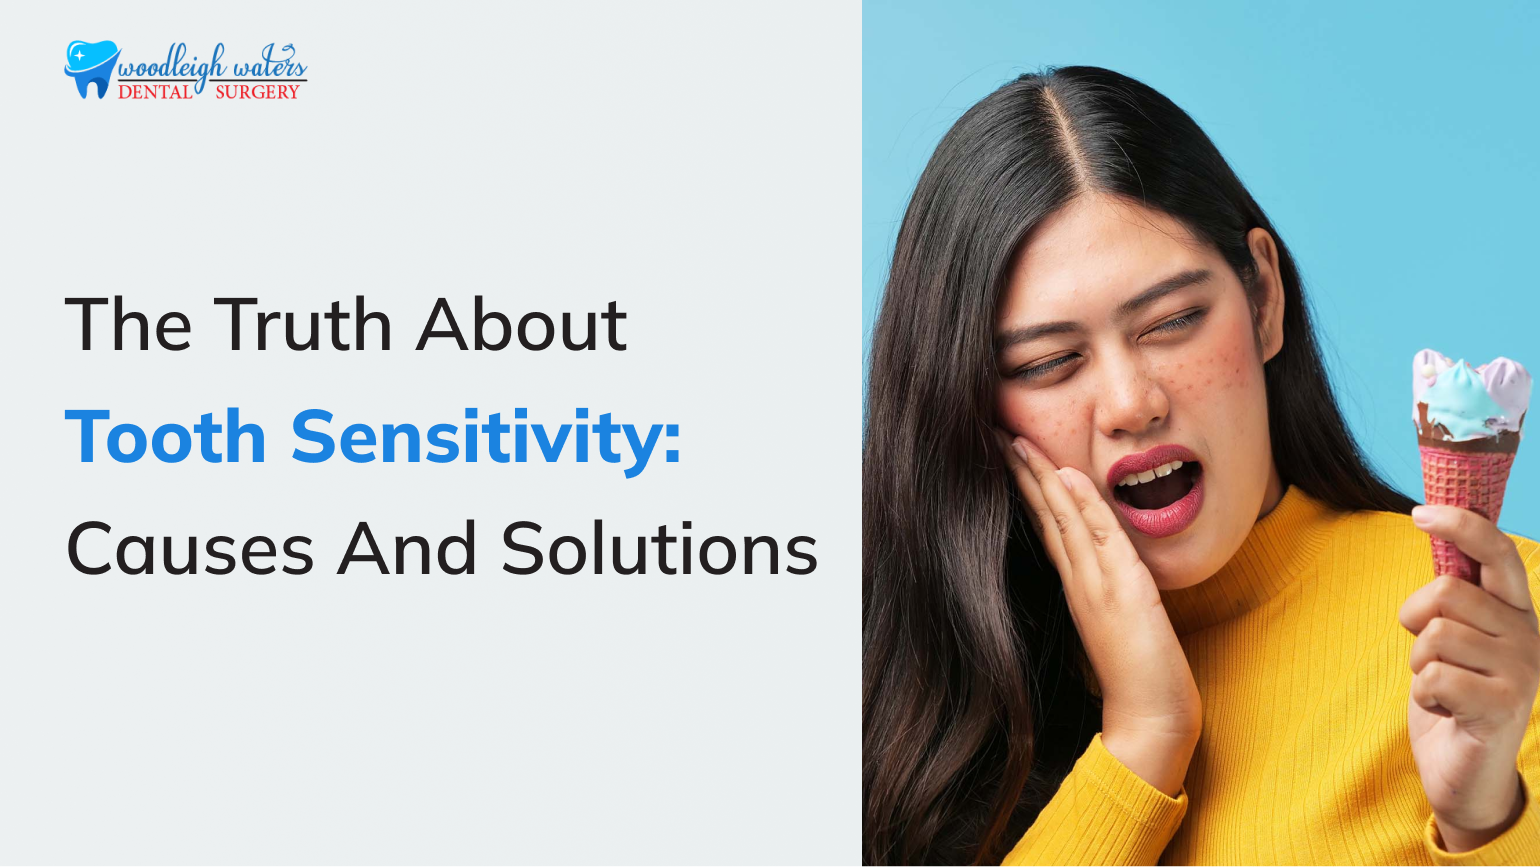 The Truth About Tooth Sensitivity: Causes and Solutions